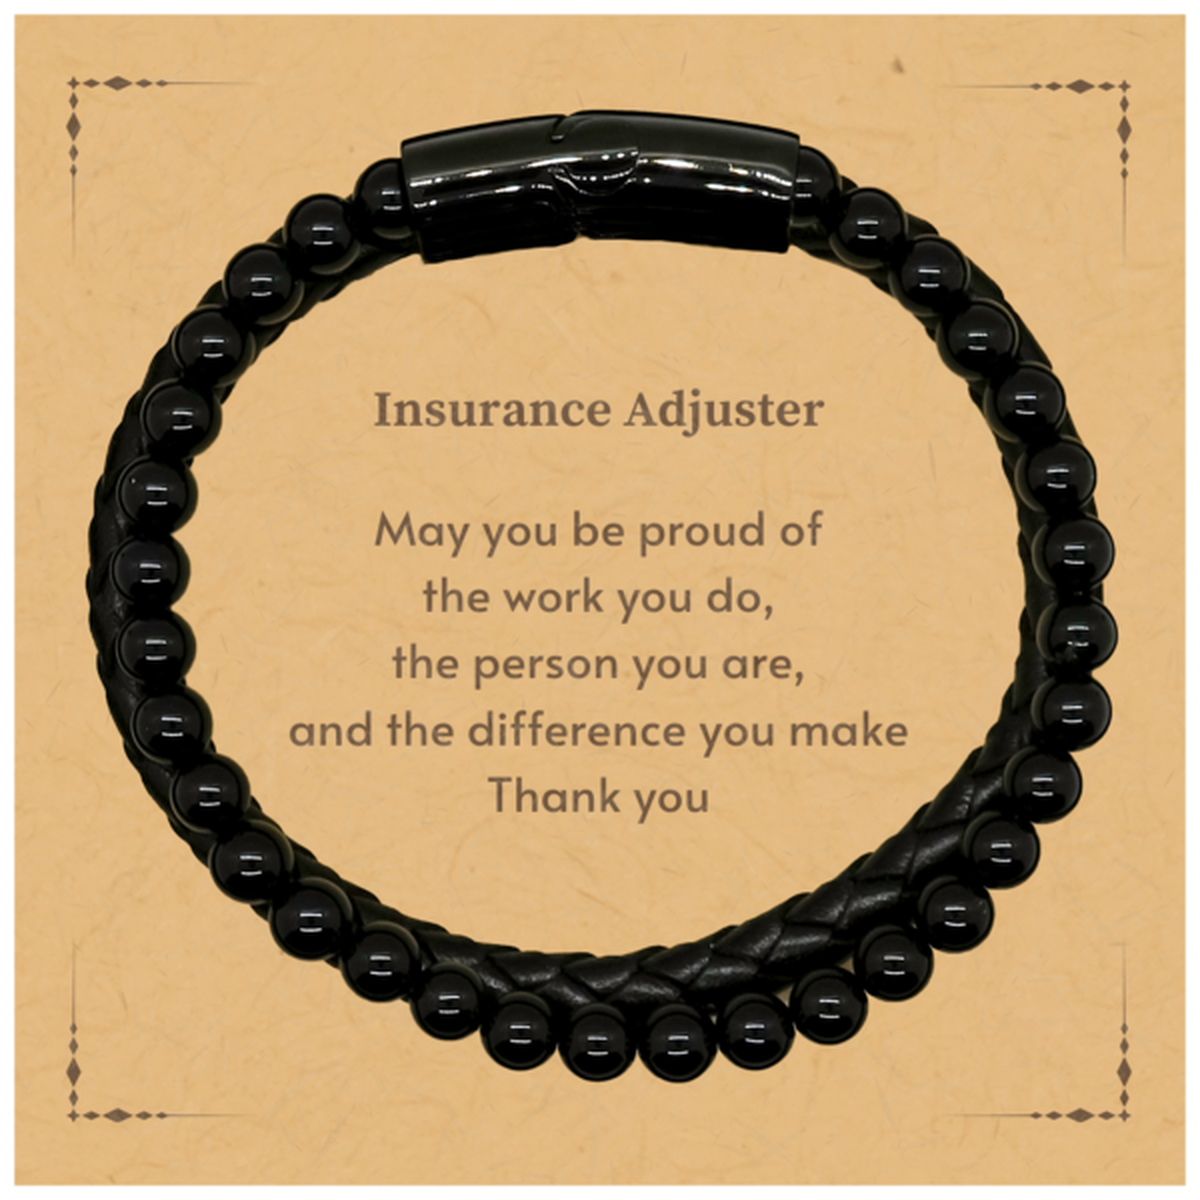 Heartwarming Stone Leather Bracelets Retirement Coworkers Gifts for Insurance Adjuster, Insurance Adjuster May You be proud of the work you do, the person you are Gifts for Boss Men Women Friends